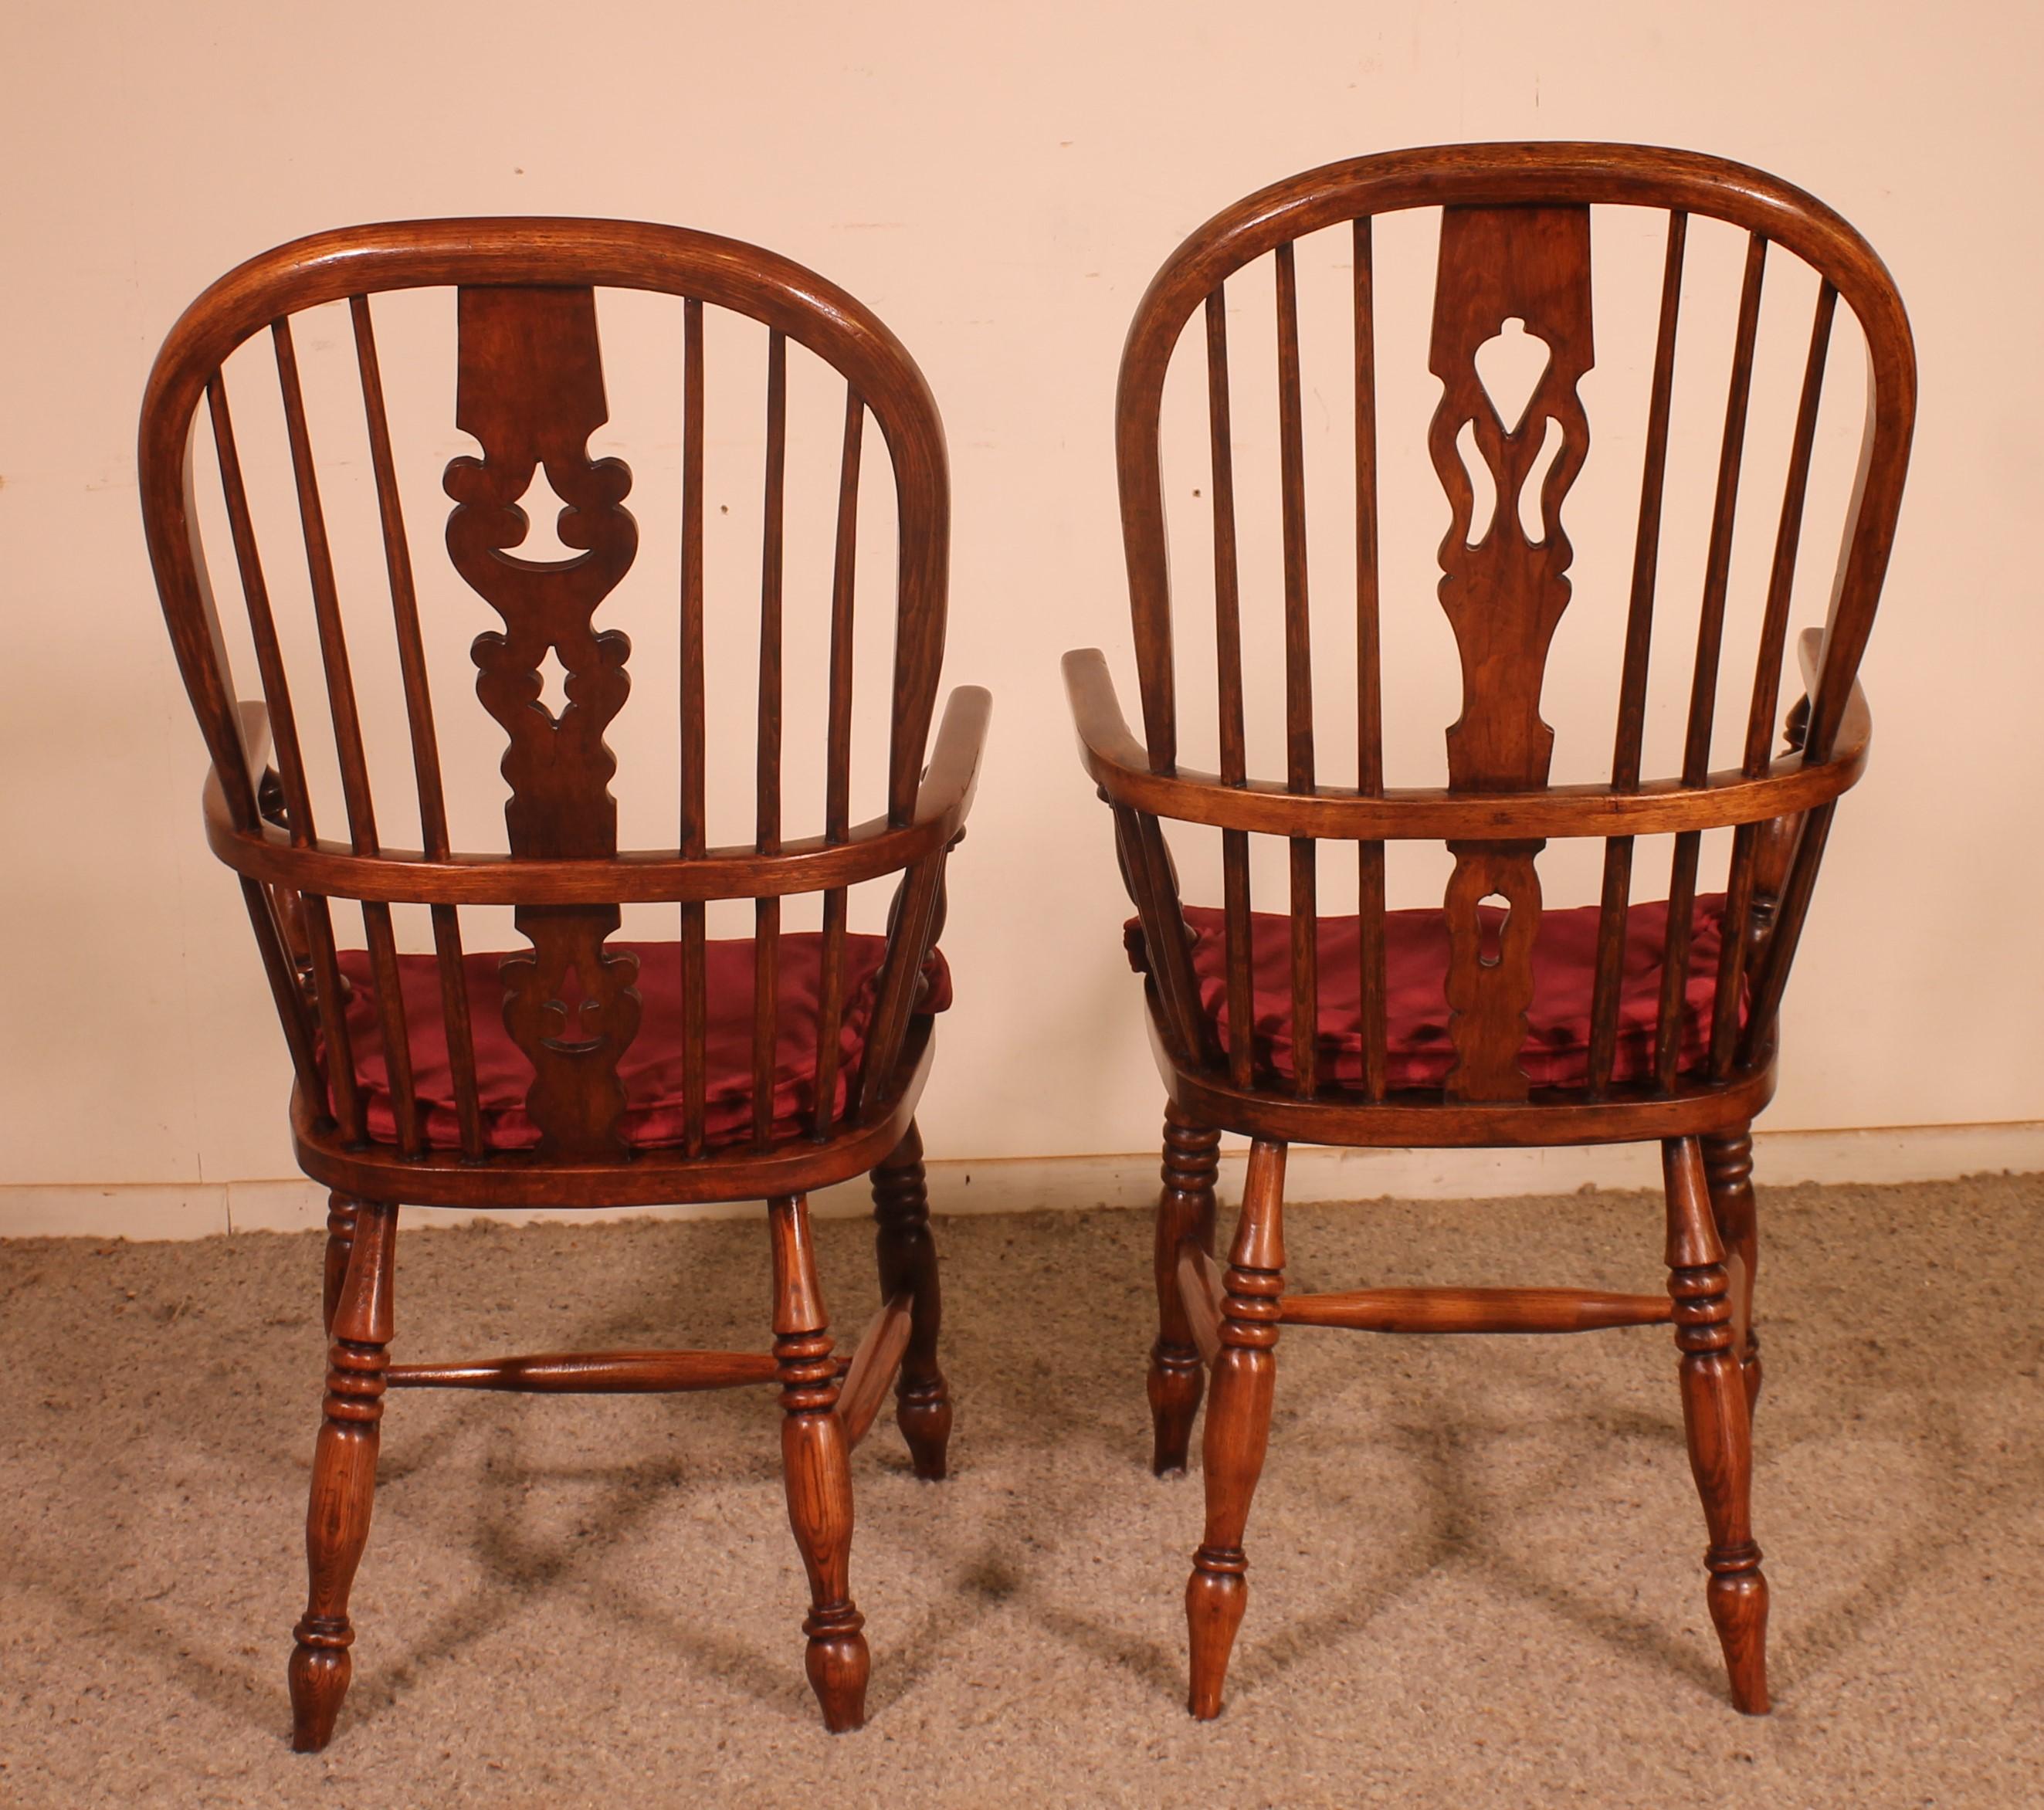 Victorian Near Pair of English Windsor Armchairs from the 19th Century